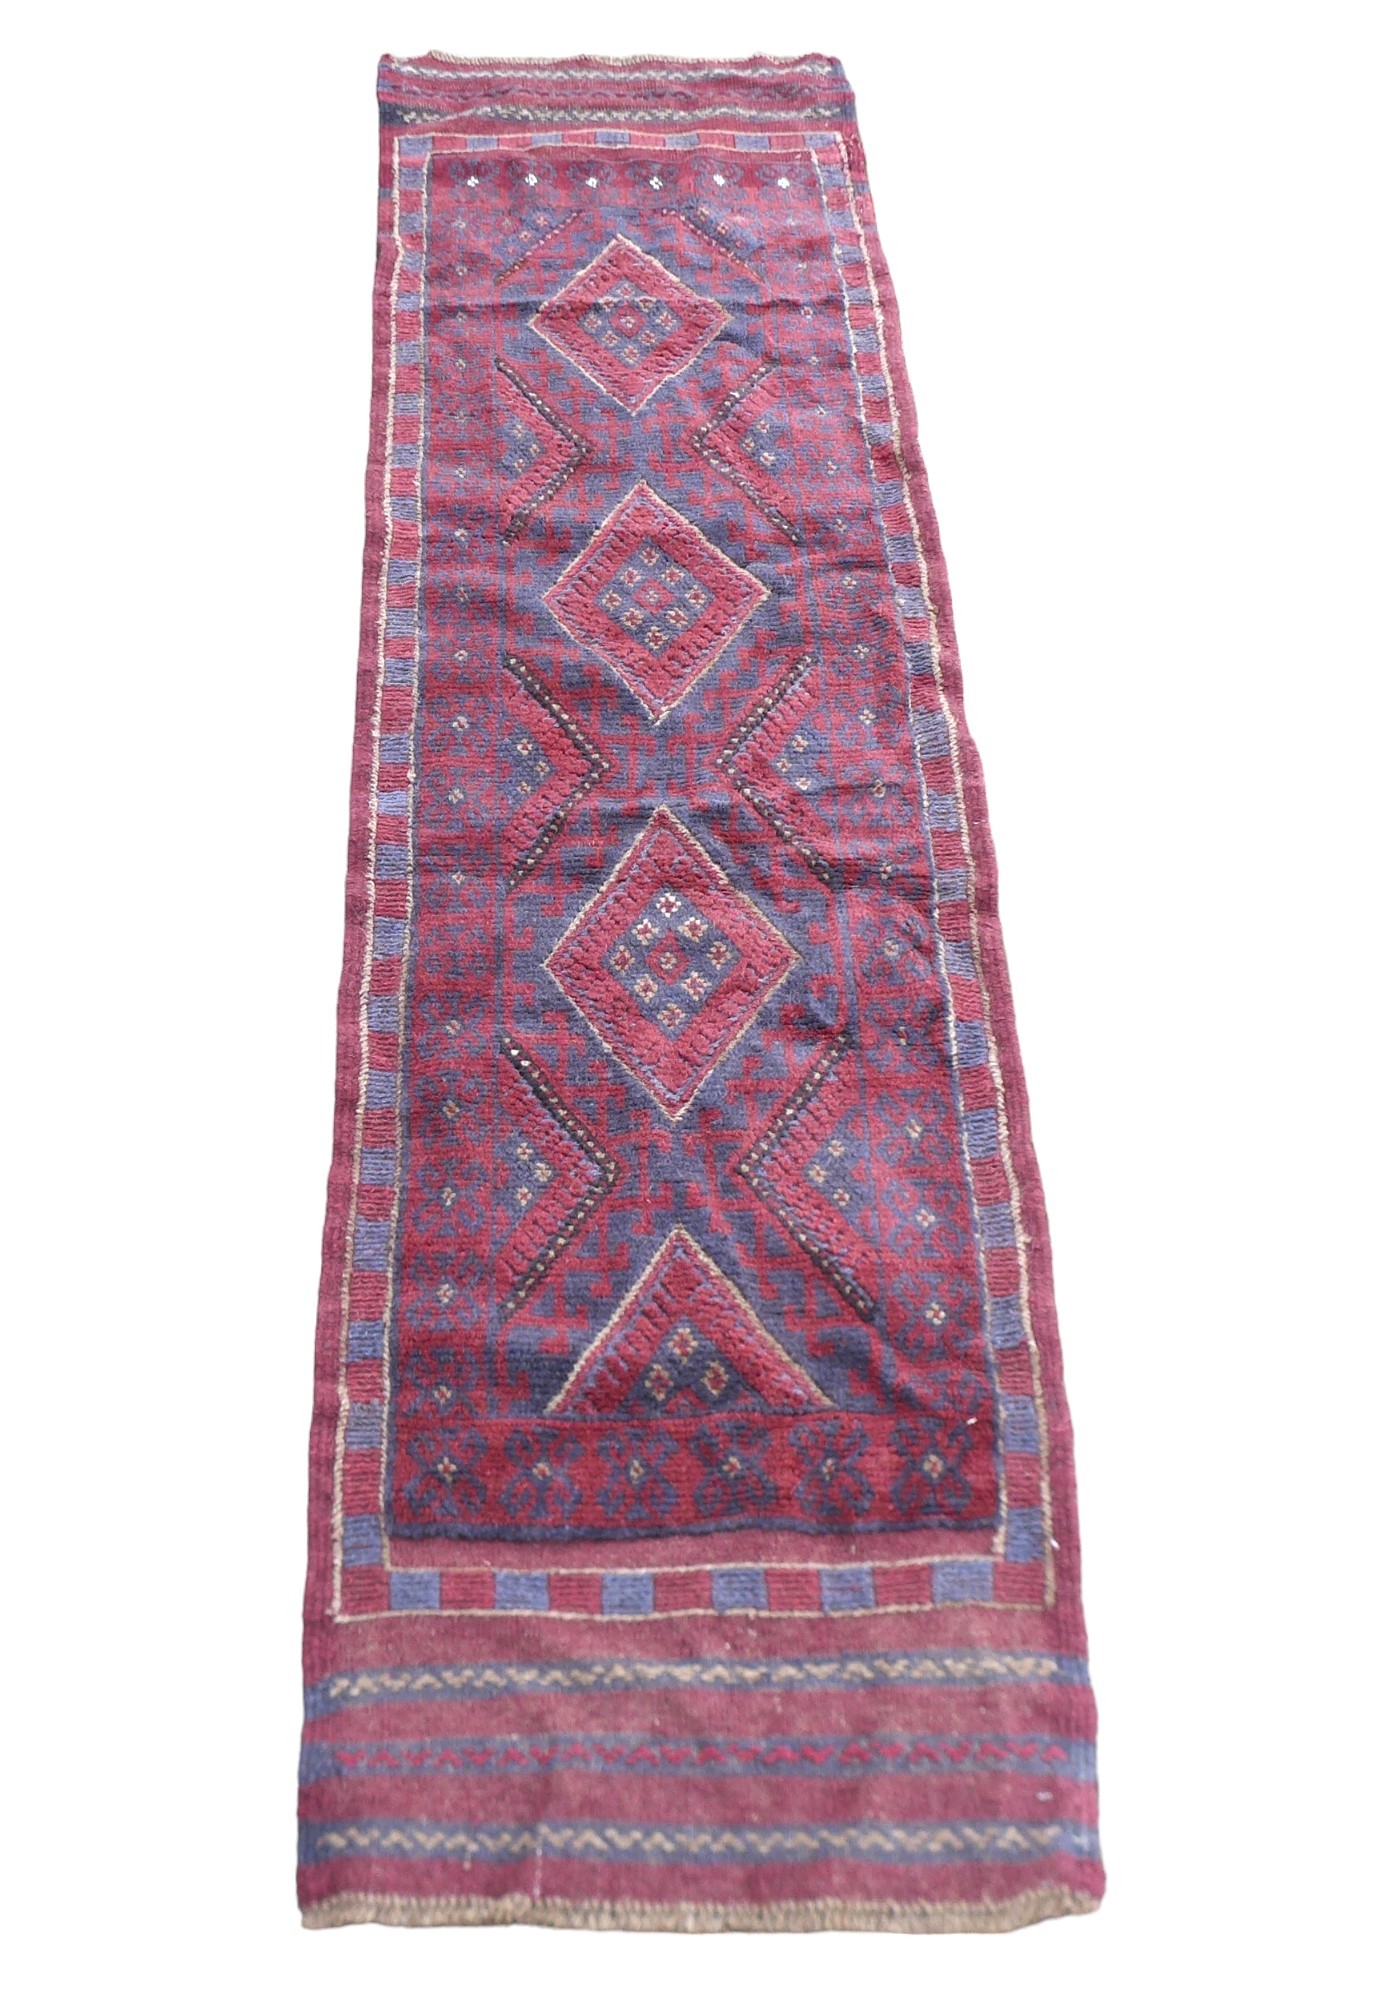 Red and blue geometric 100% hand knotted woollen runner rug, 240 by 60cm.